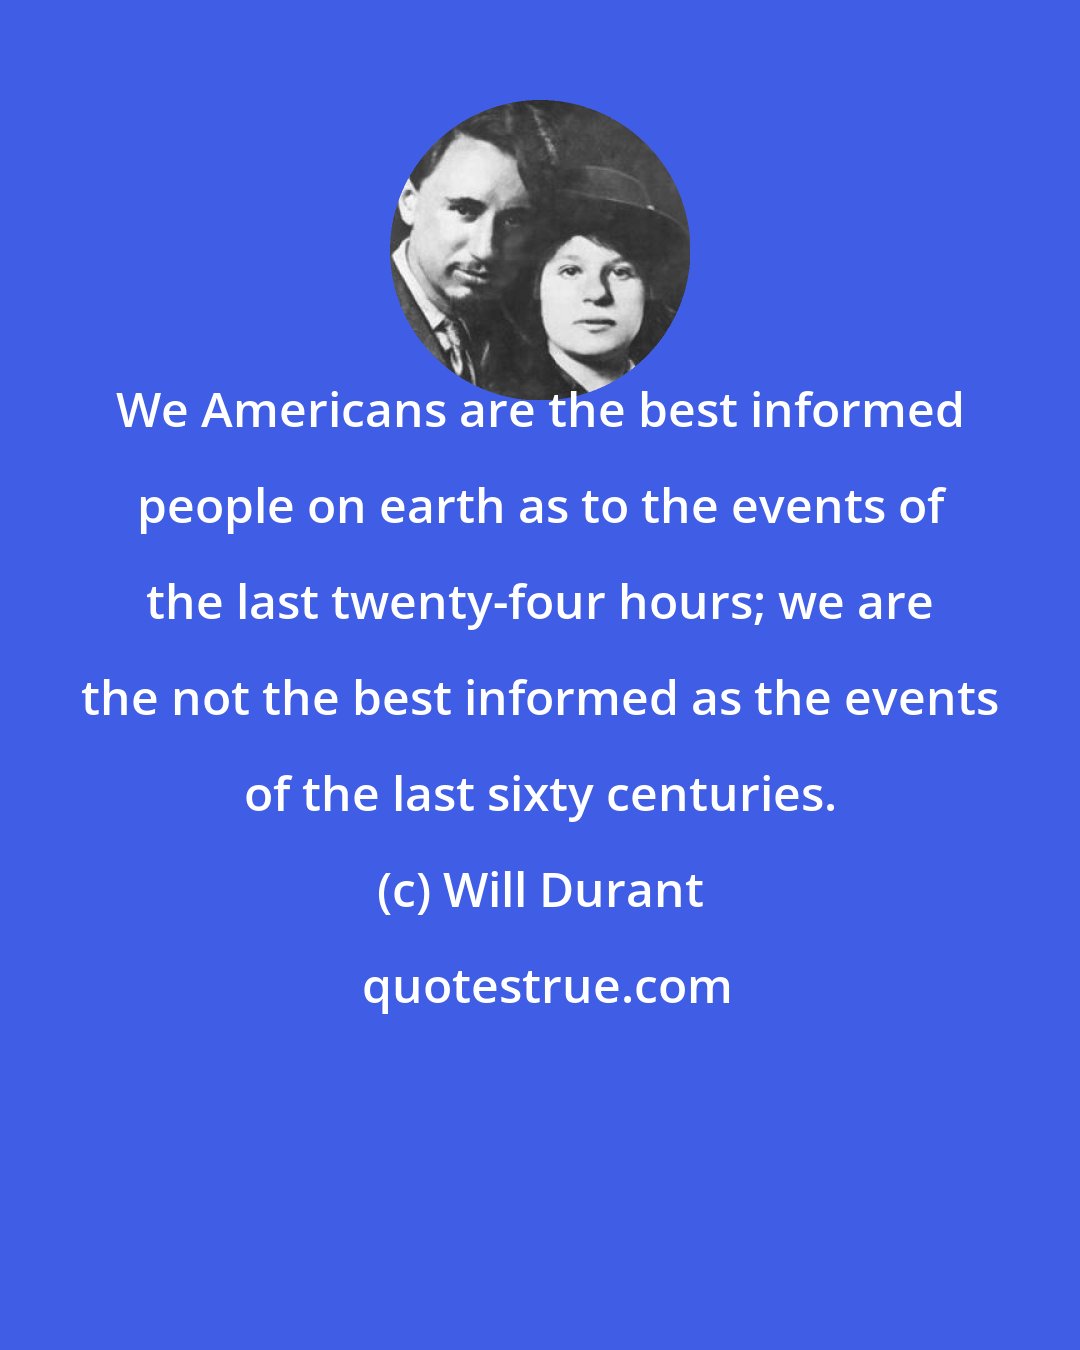 Will Durant: We Americans are the best informed people on earth as to the events of the last twenty-four hours; we are the not the best informed as the events of the last sixty centuries.